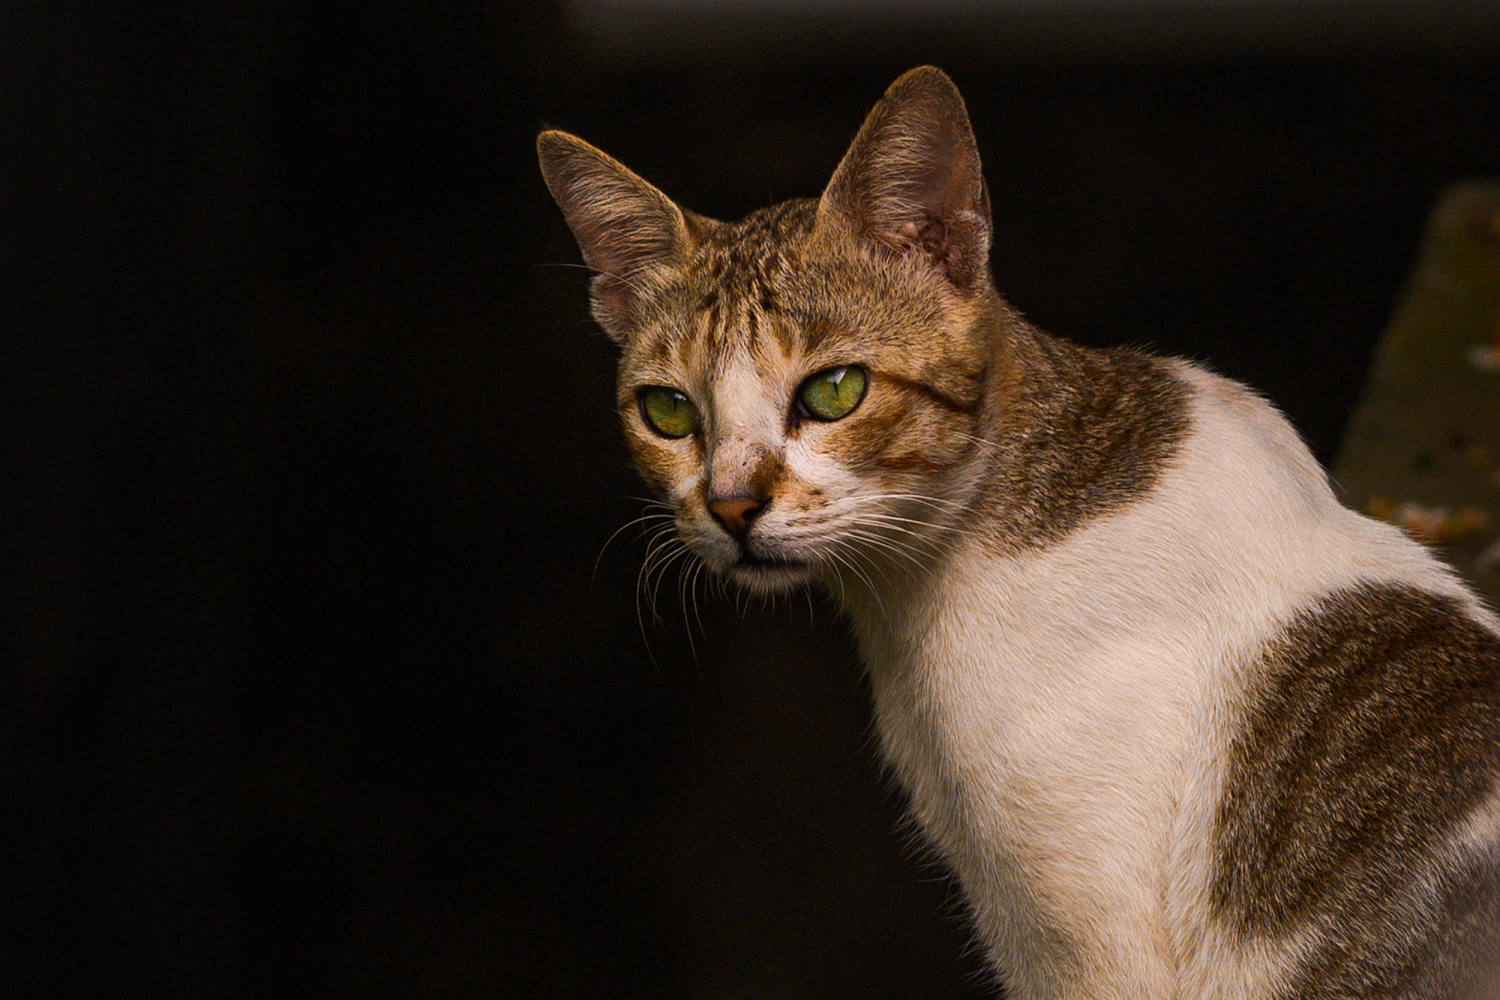 oregon's first case of human plague in 8 years likely came from a pet cat